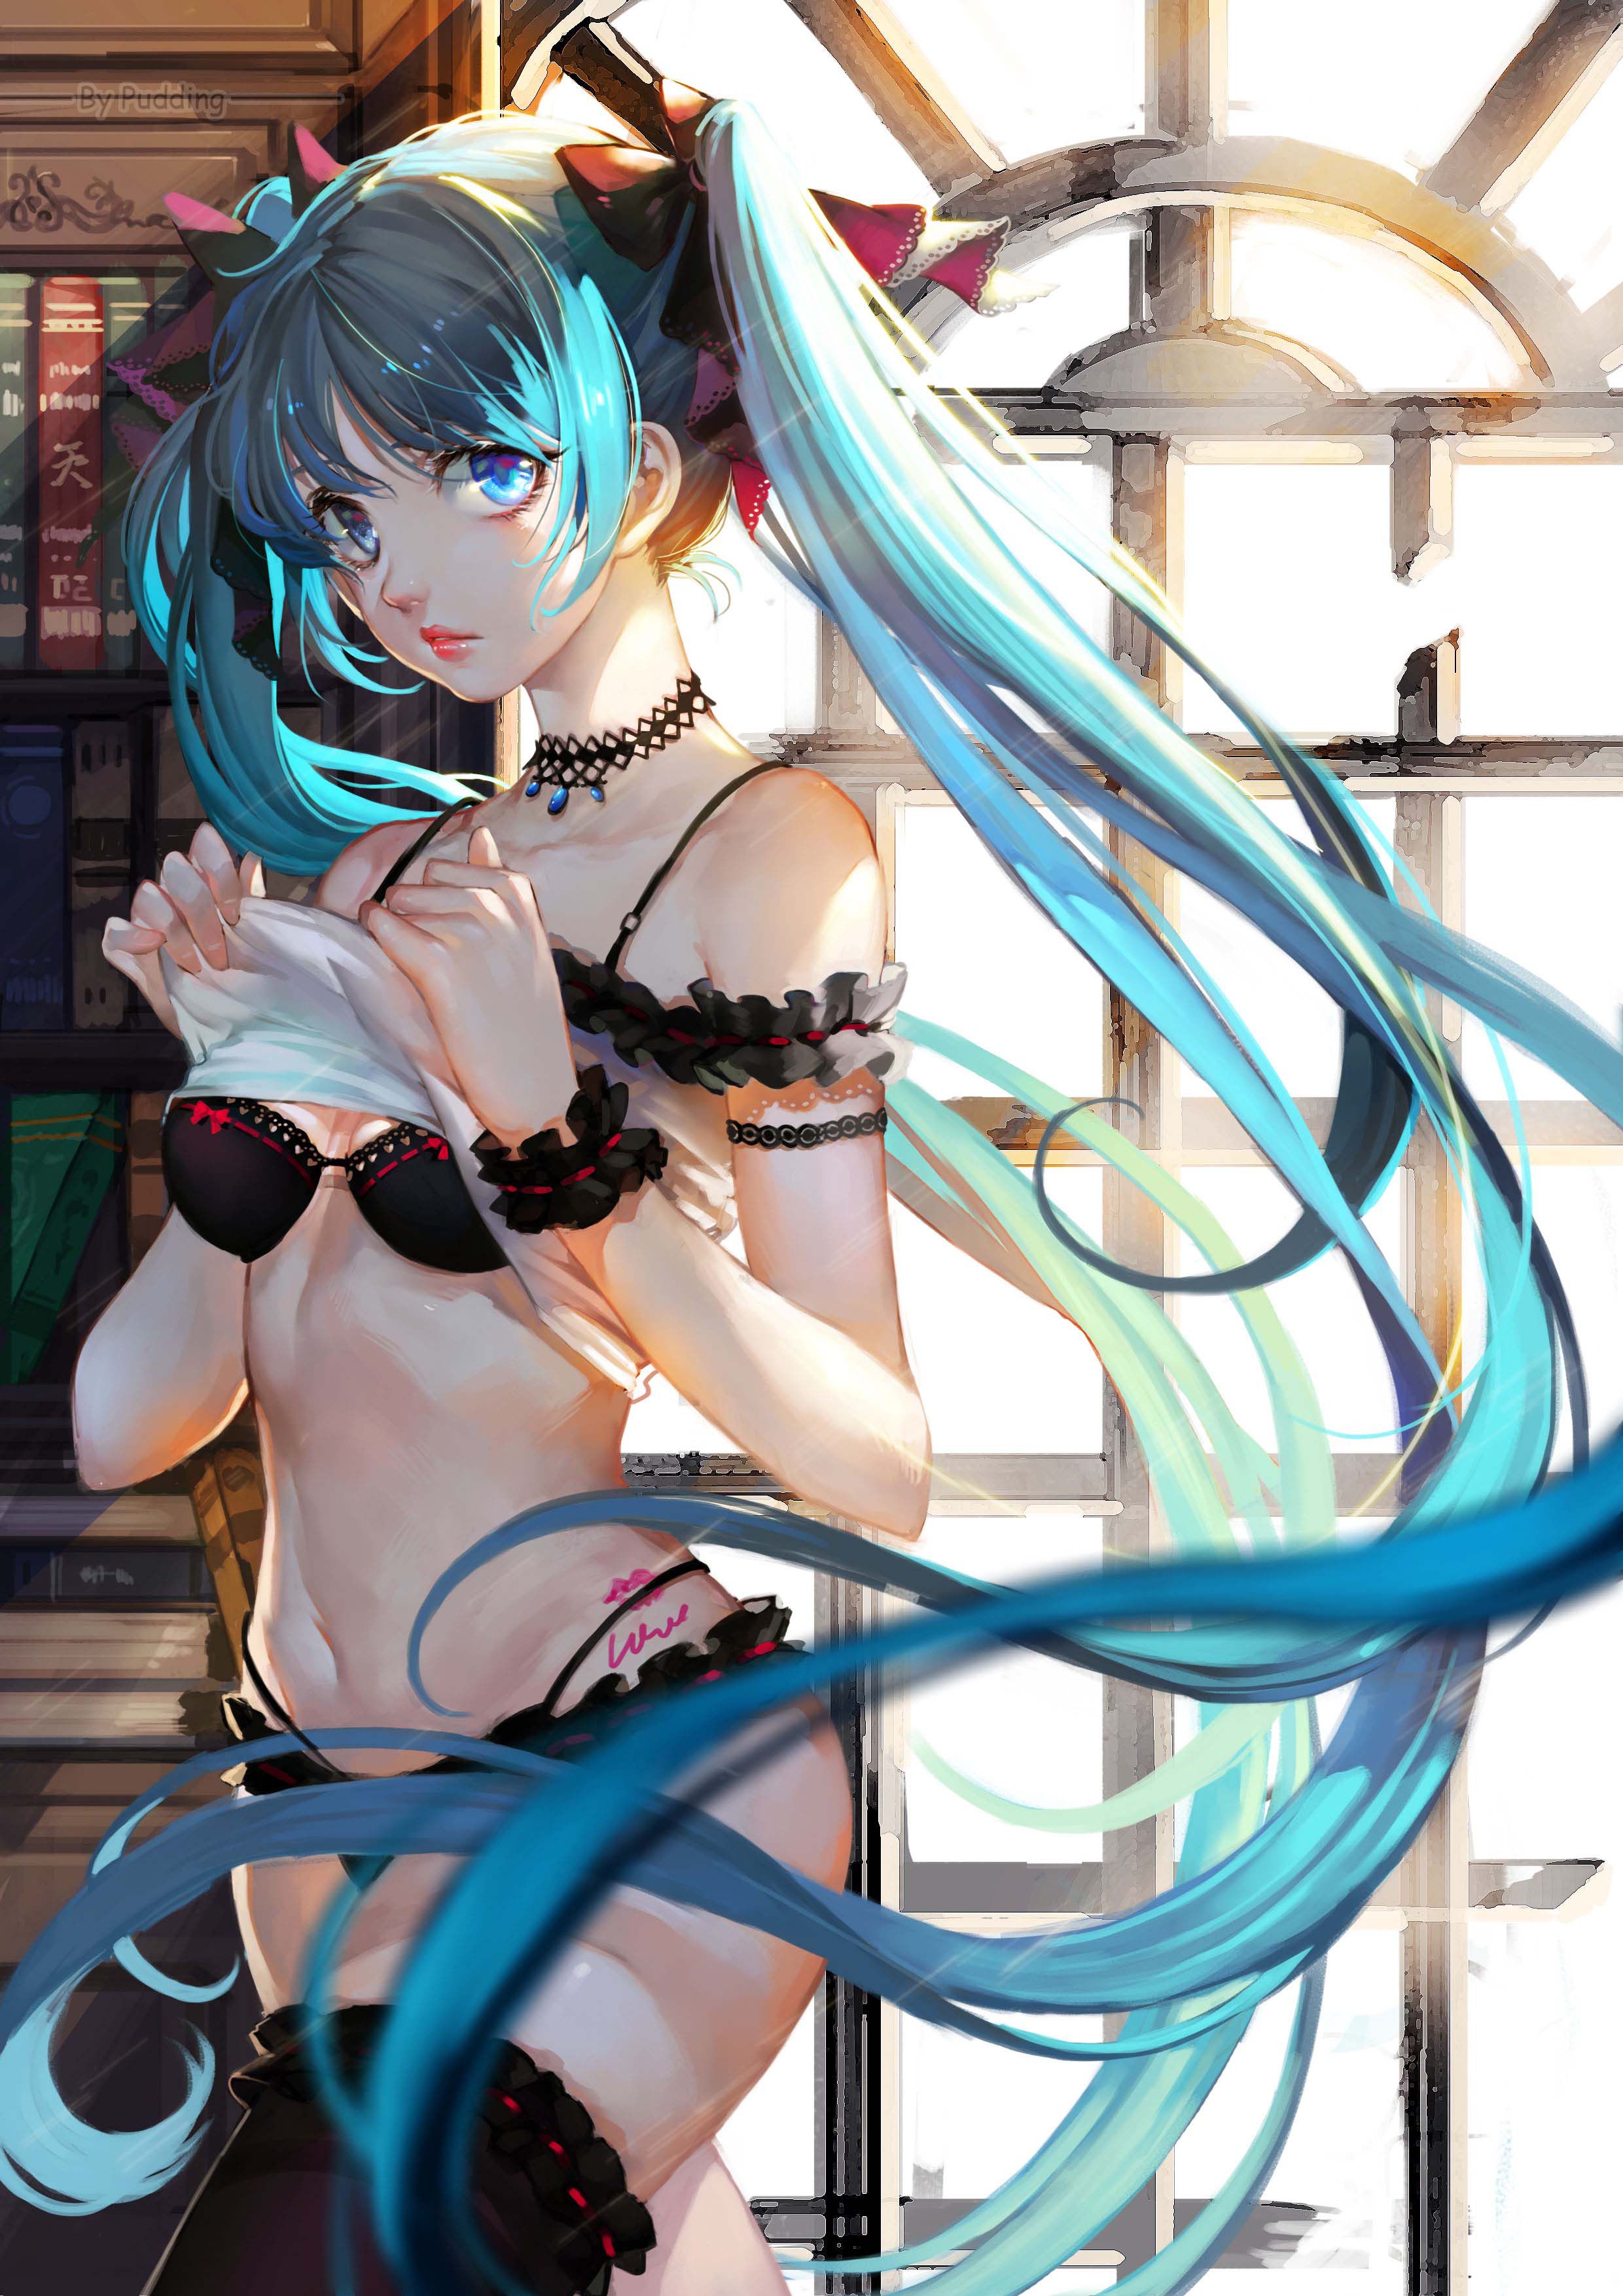 Assorted Miku images after a long absence. 10